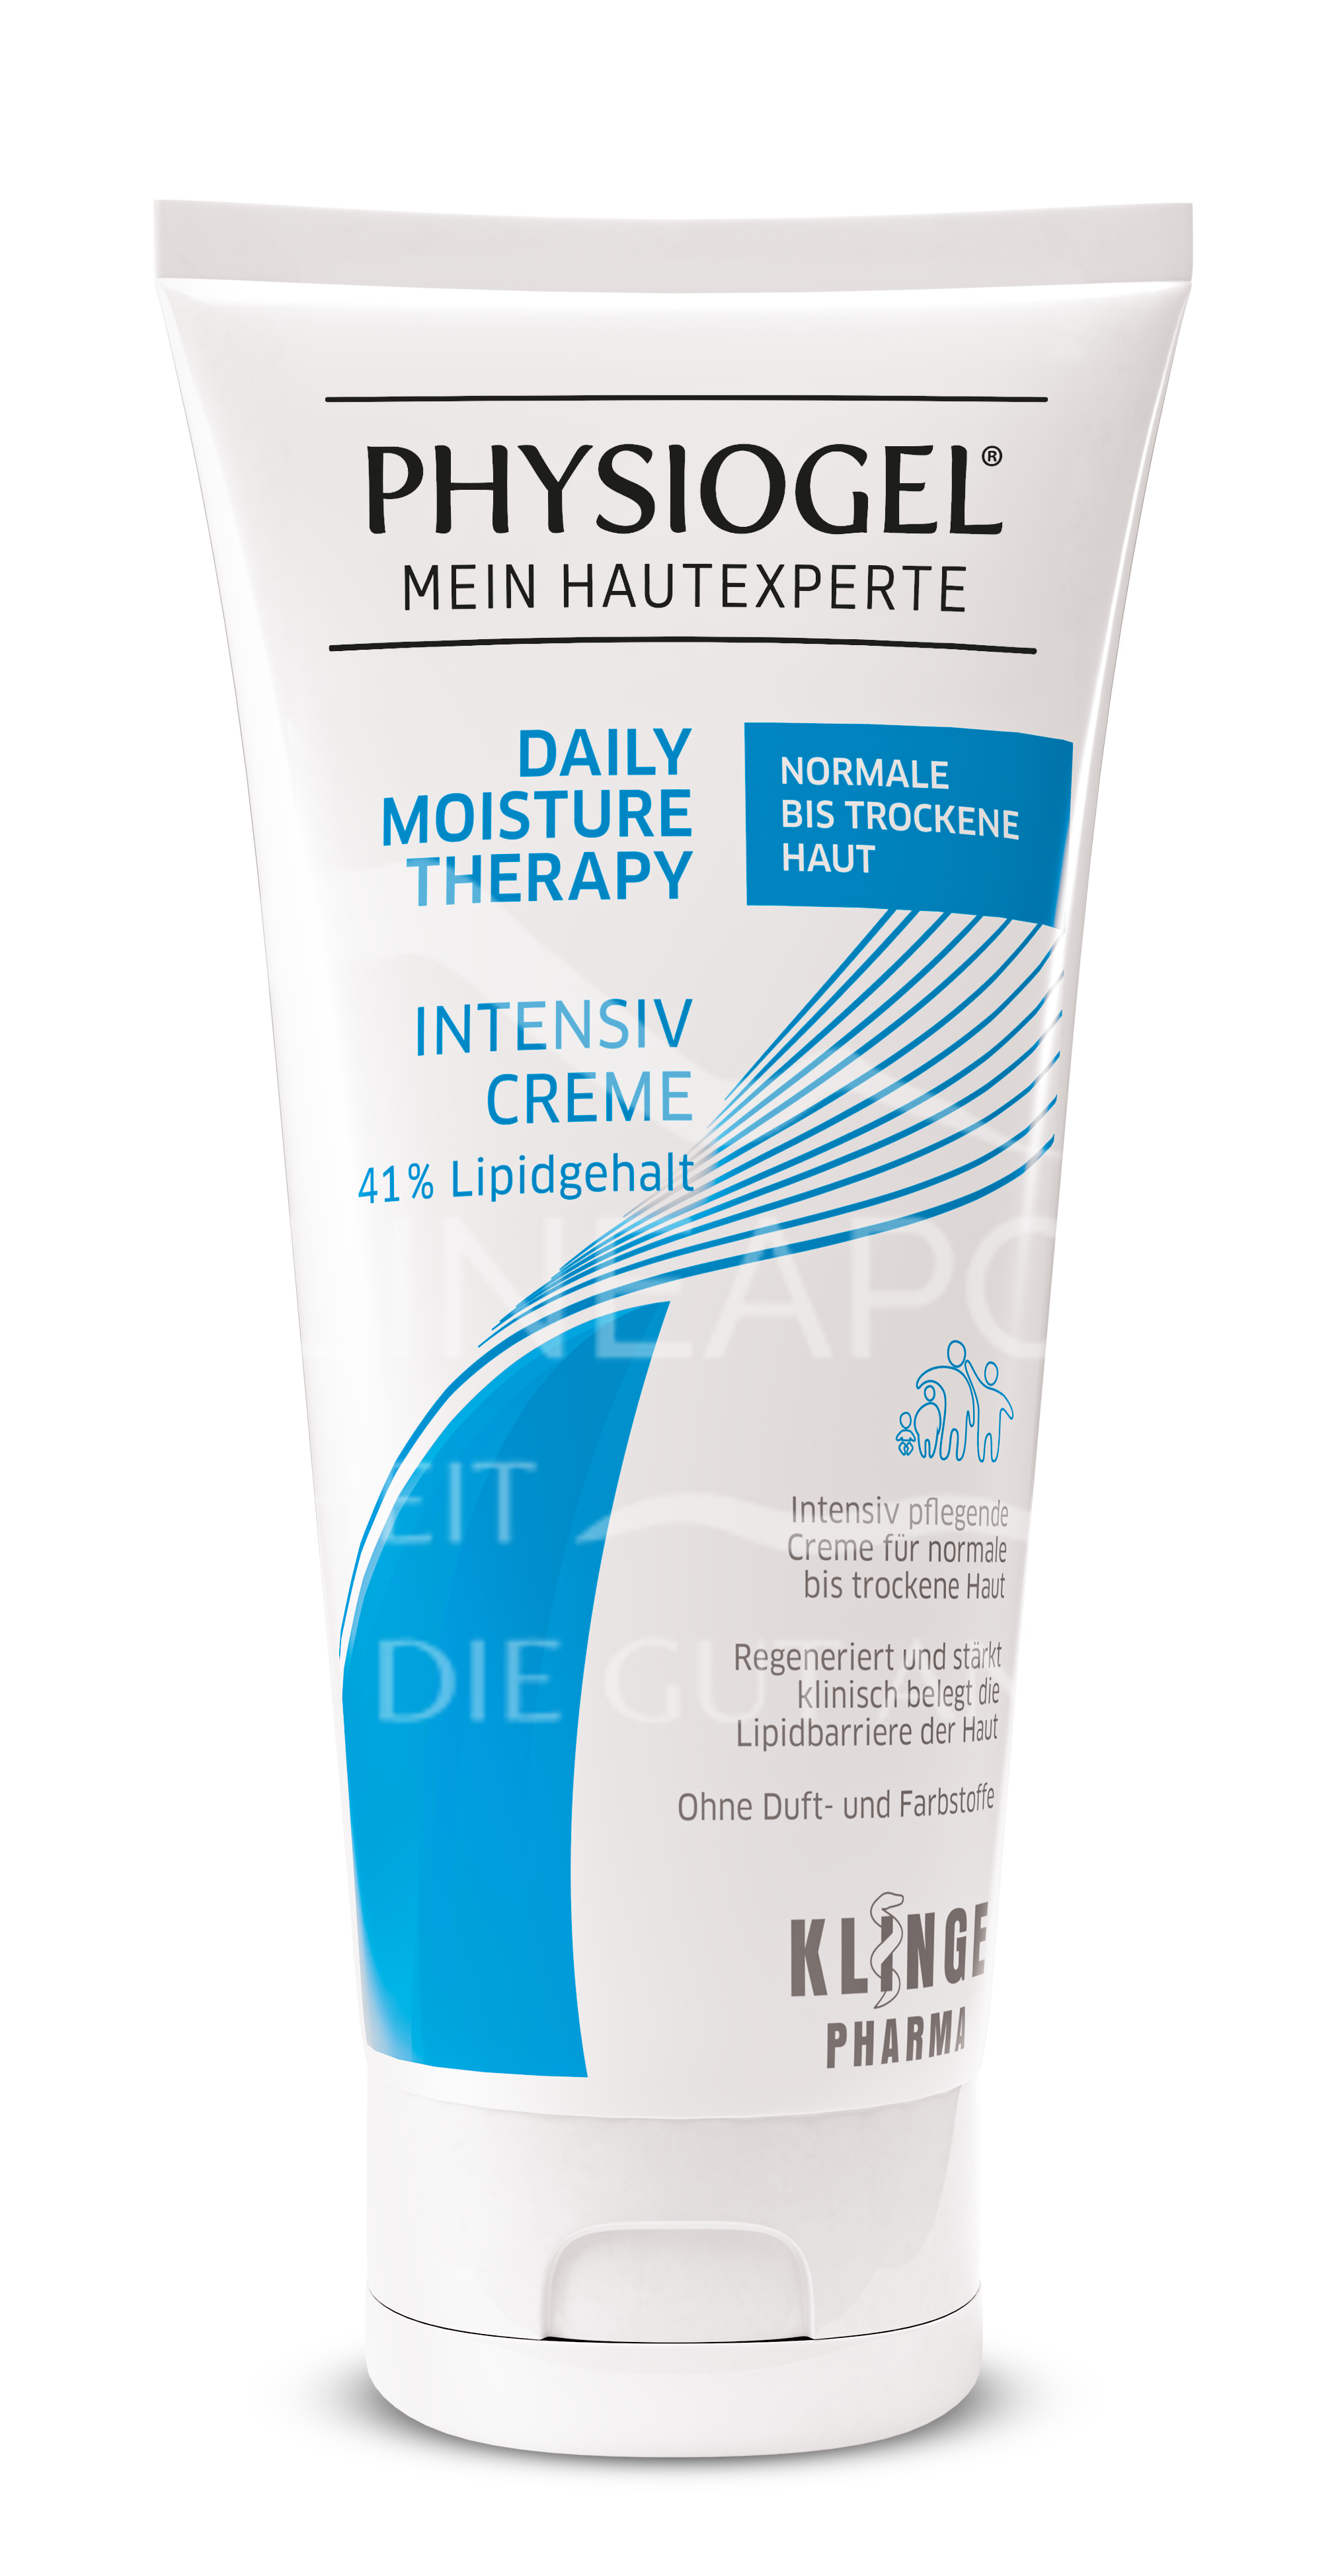 Physiogel® Daily Moisture Therapy Intensiv Creme - Normale bis trockene Haut